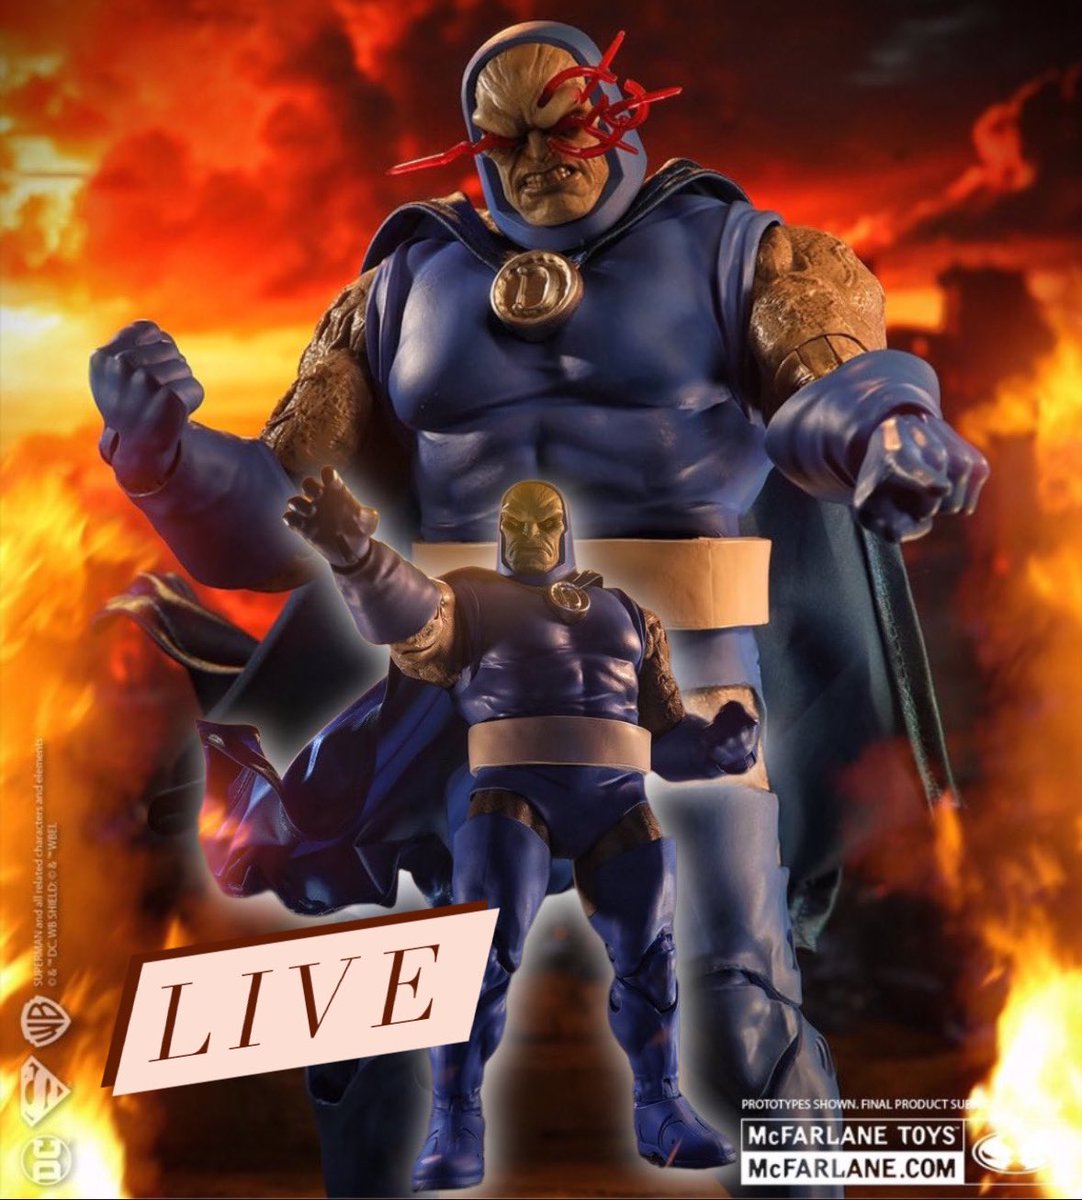 Now live! From McFarlane Toys, with this awesome Darkseid (DC Classic) 7-in Action Figure ~ sold out at Amazon and EE Linky ~ bit.ly/3VktLOW #Ad #FPN #FunkoPOPNews #Darkseid #DC #McFarlaneToys #ActionFigure #Figure #StarWars #BlackSeries #Super7 #Hasbro